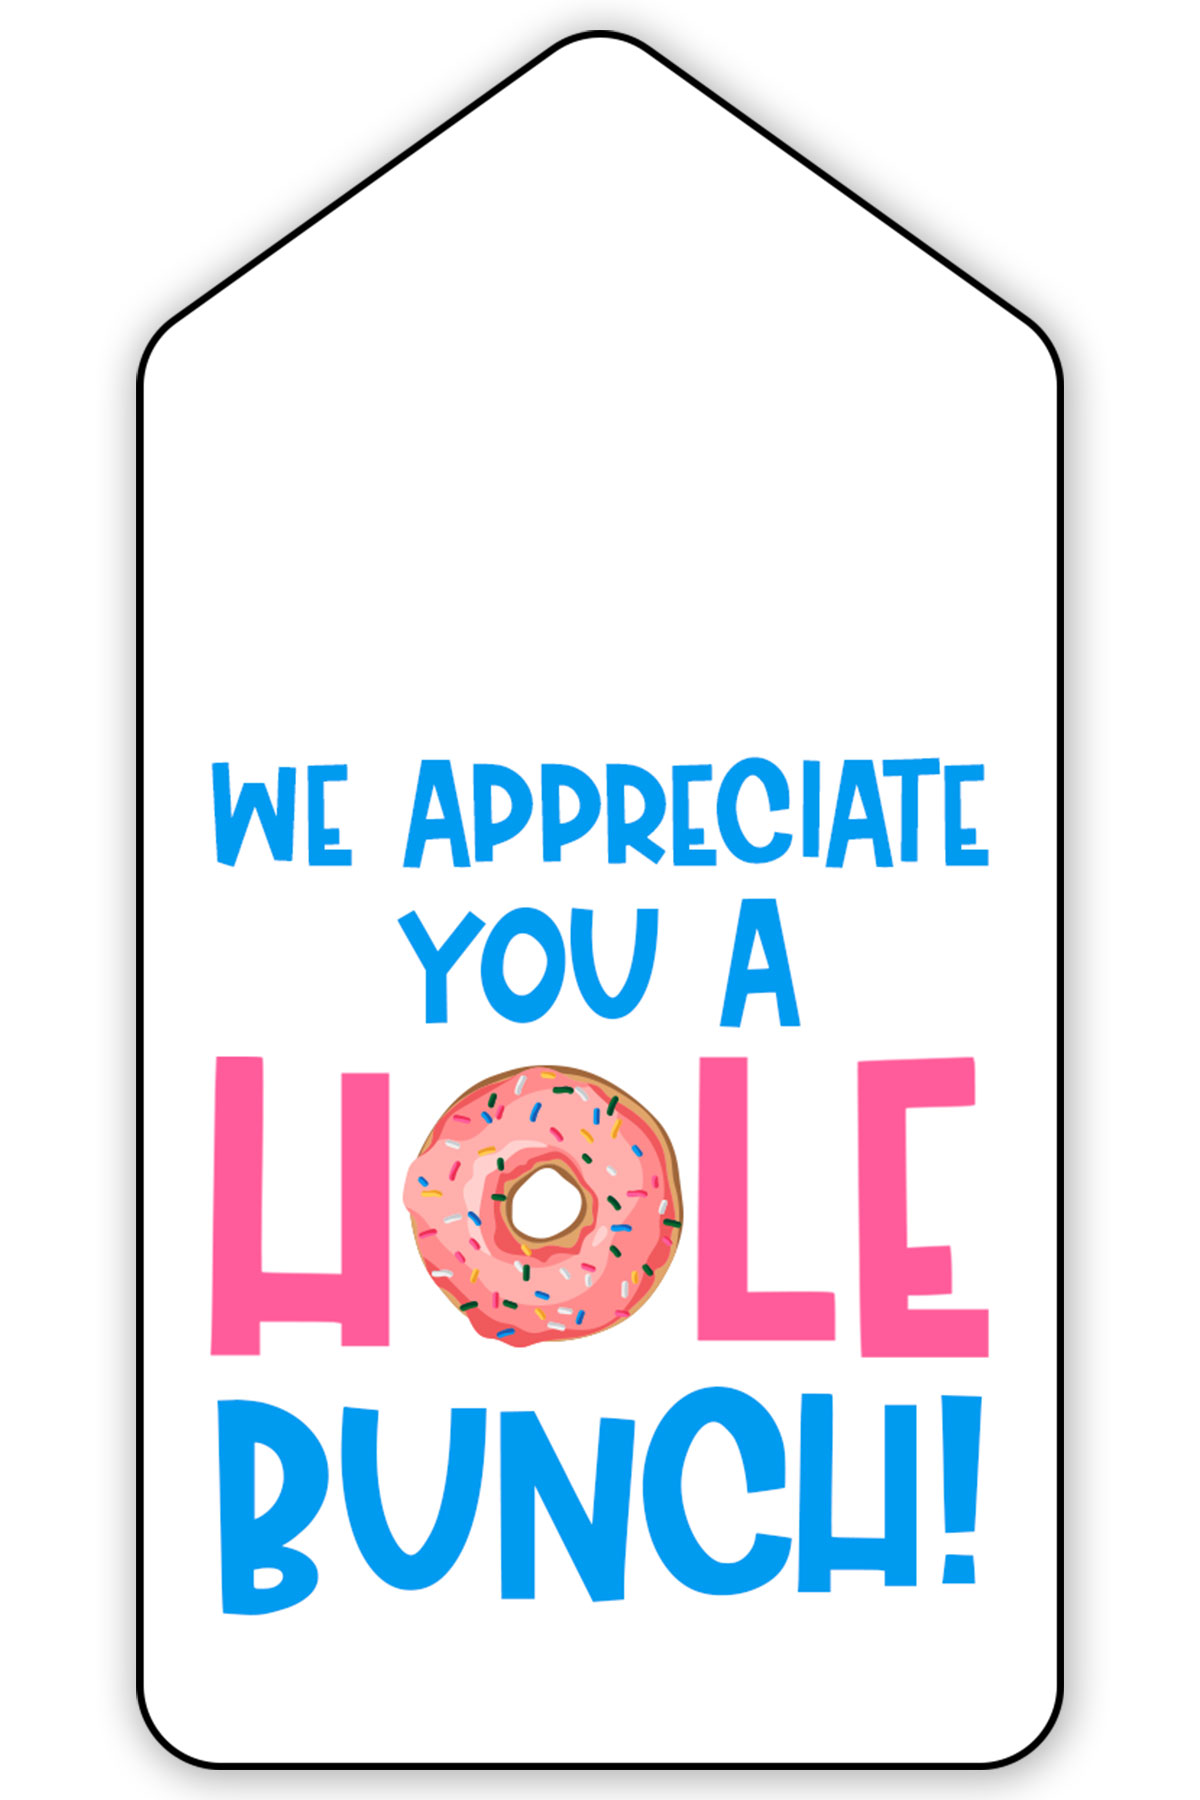 This free printable teacher appreciation gift tag says we appreciate you a hole bunch!